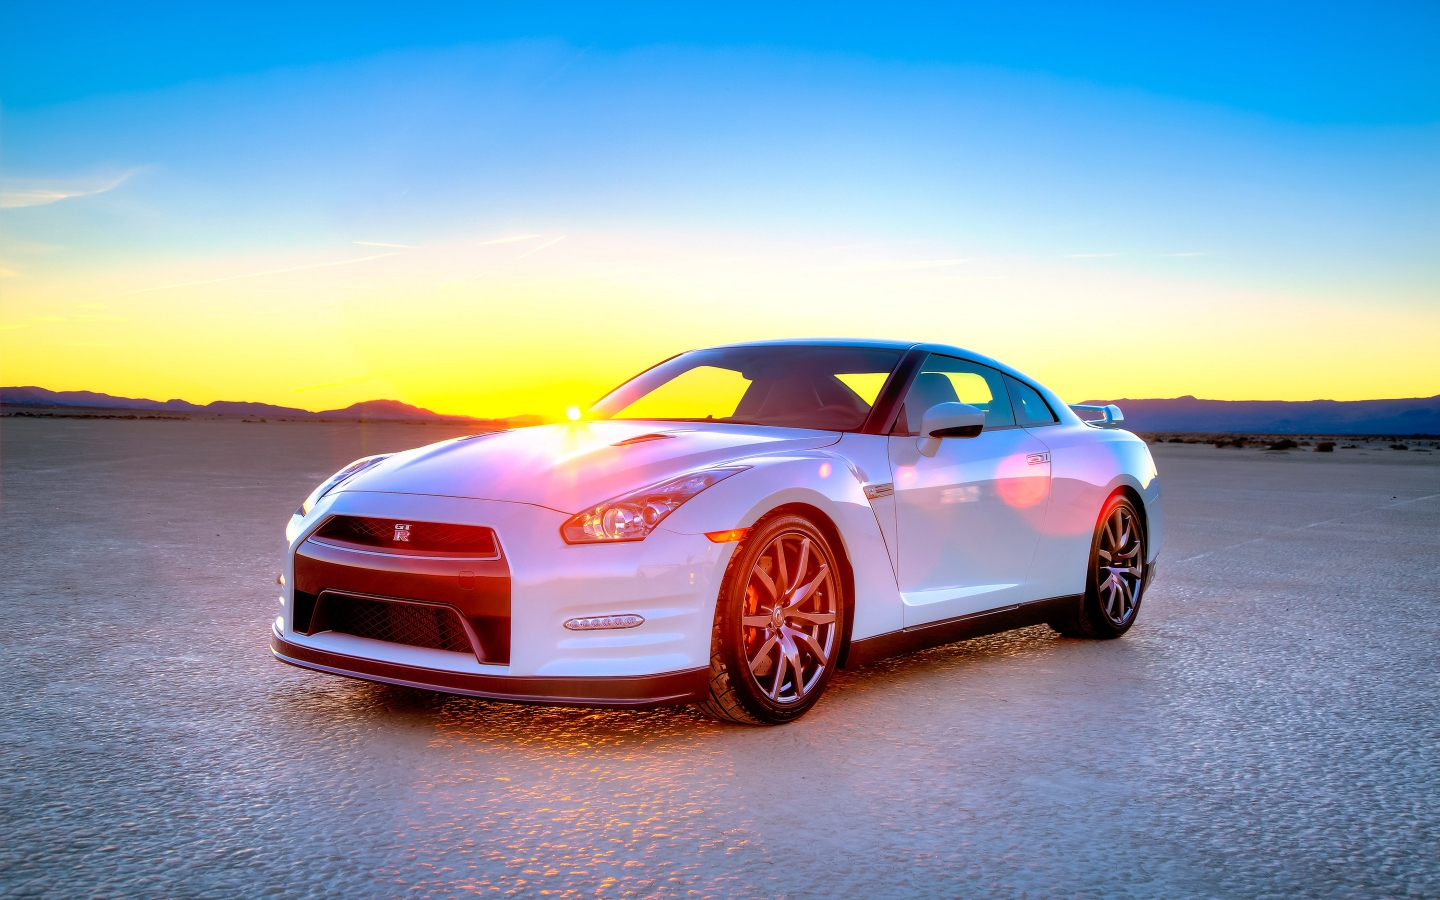 White Nissan GT-R 2014 Edition for 1440 x 900 widescreen resolution